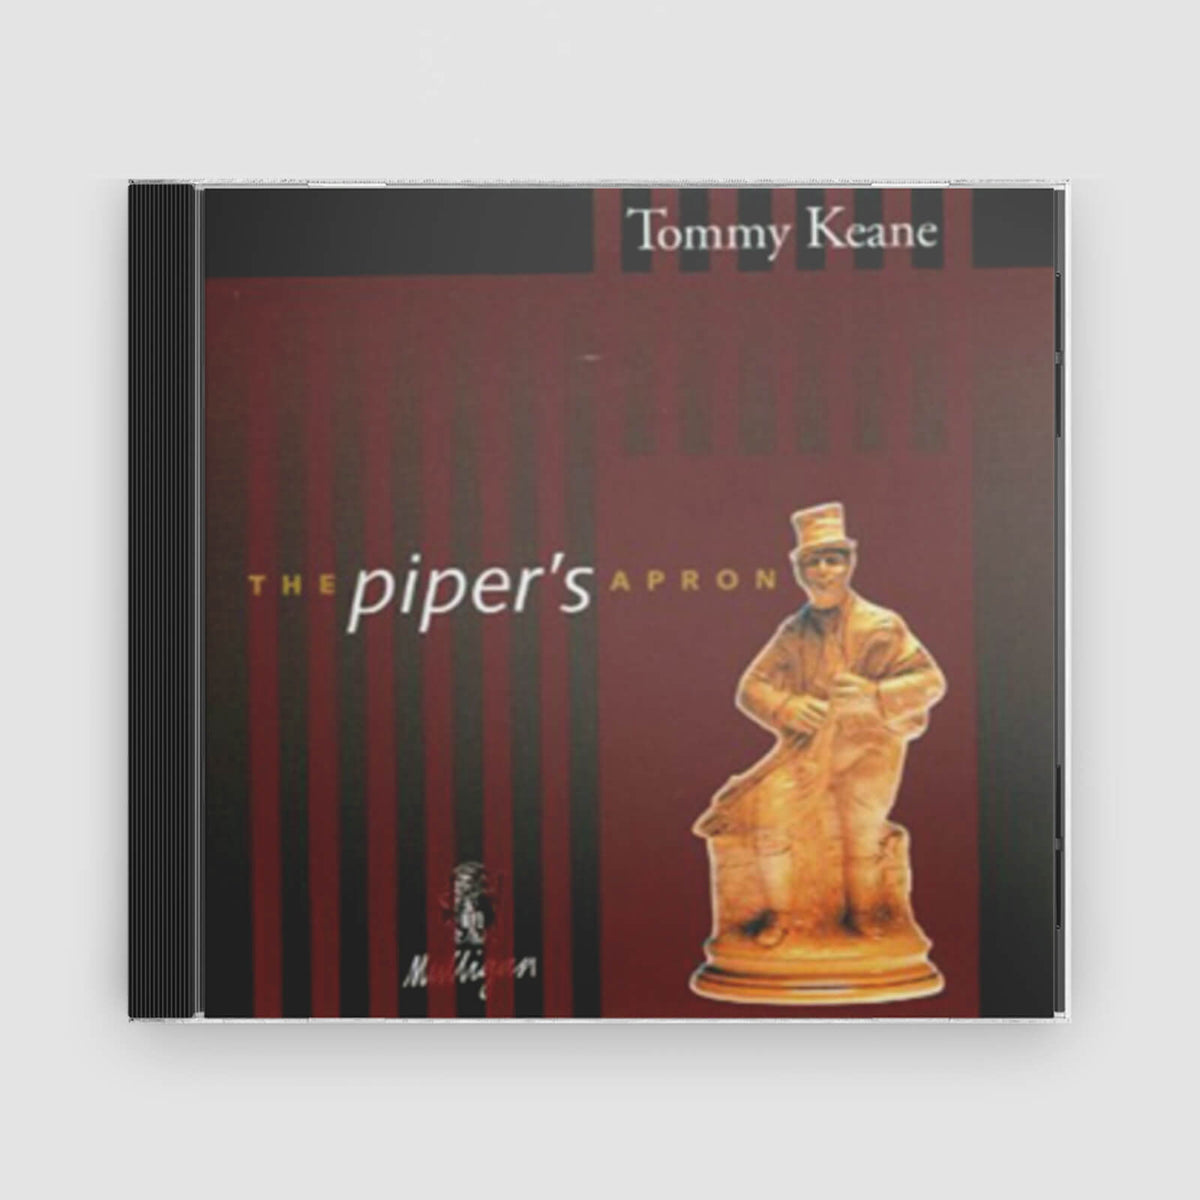 Tommy Keane : The Piper&#39;s Apron